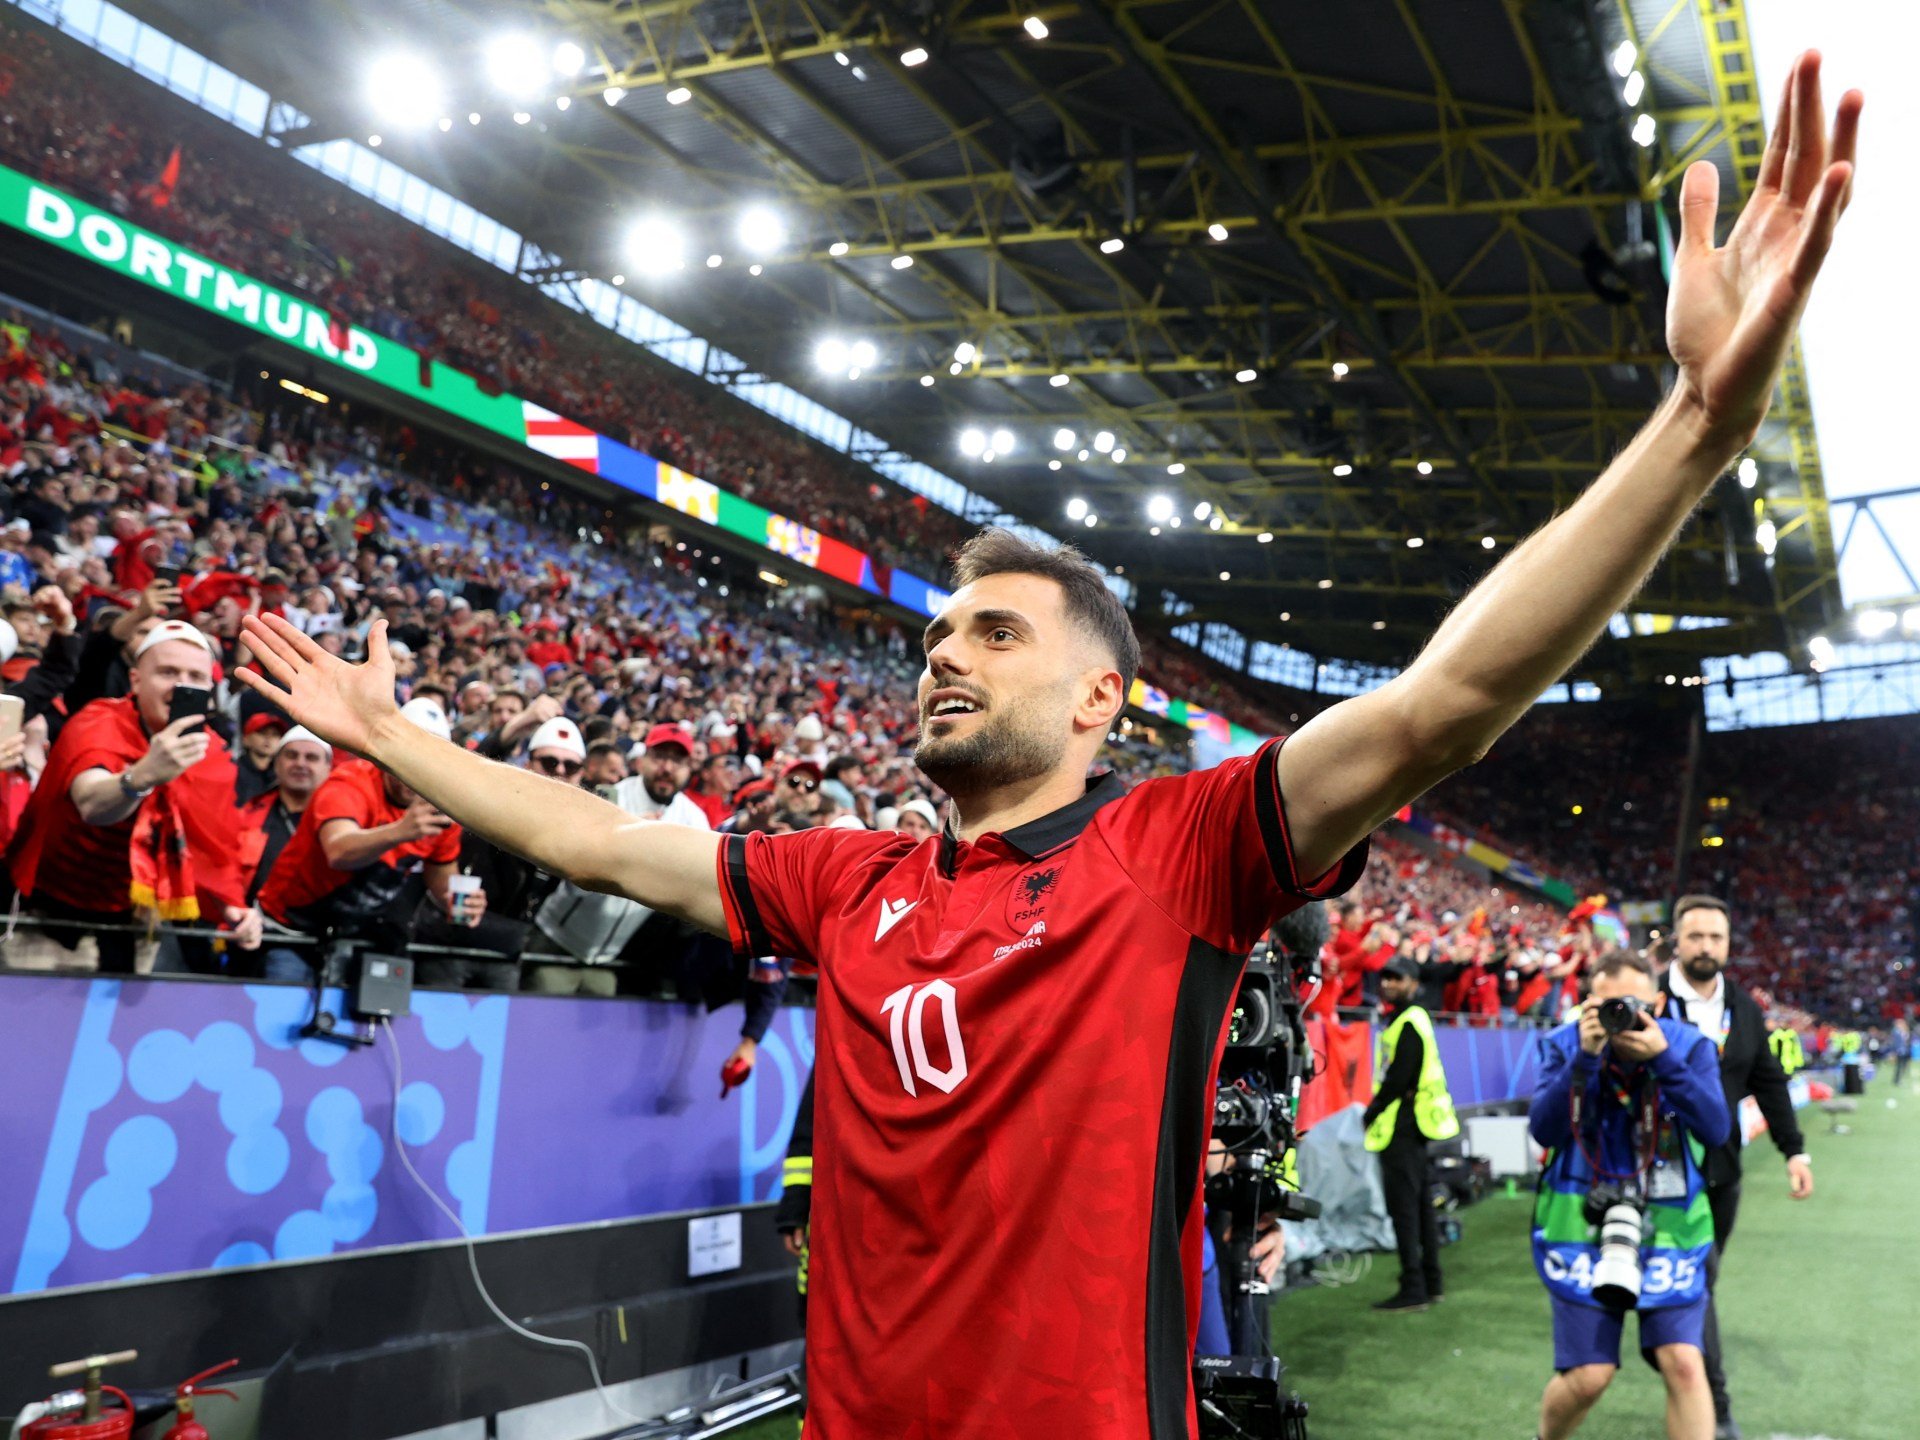 From fastest goal to fantastic fans, Albania sprang surprises at Euro 2024